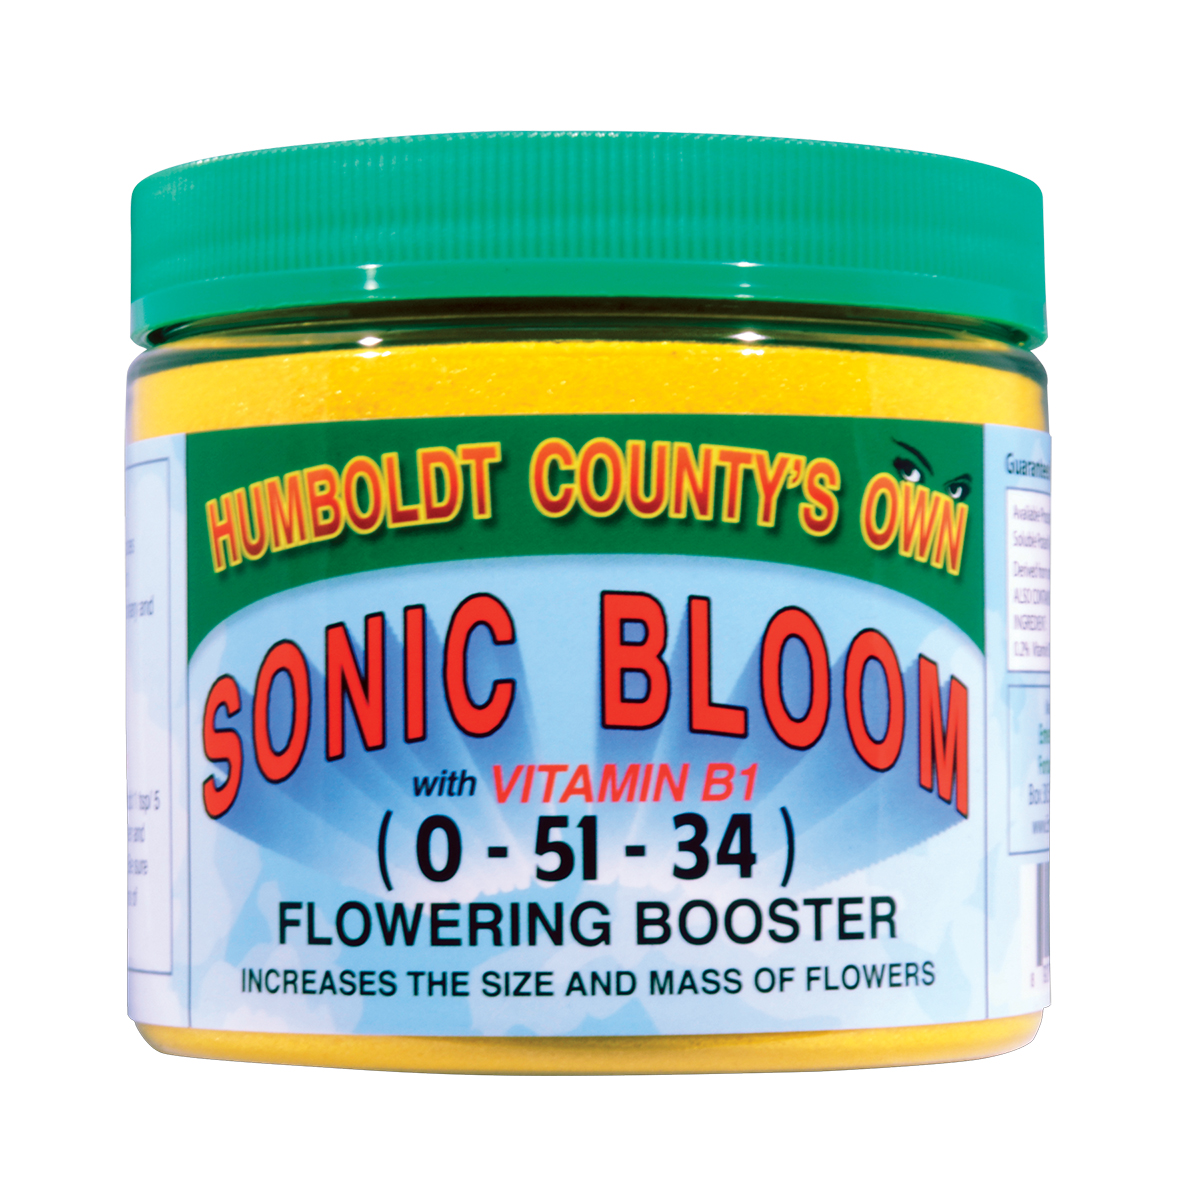 Picture for Sonic Bloom, 1 lb